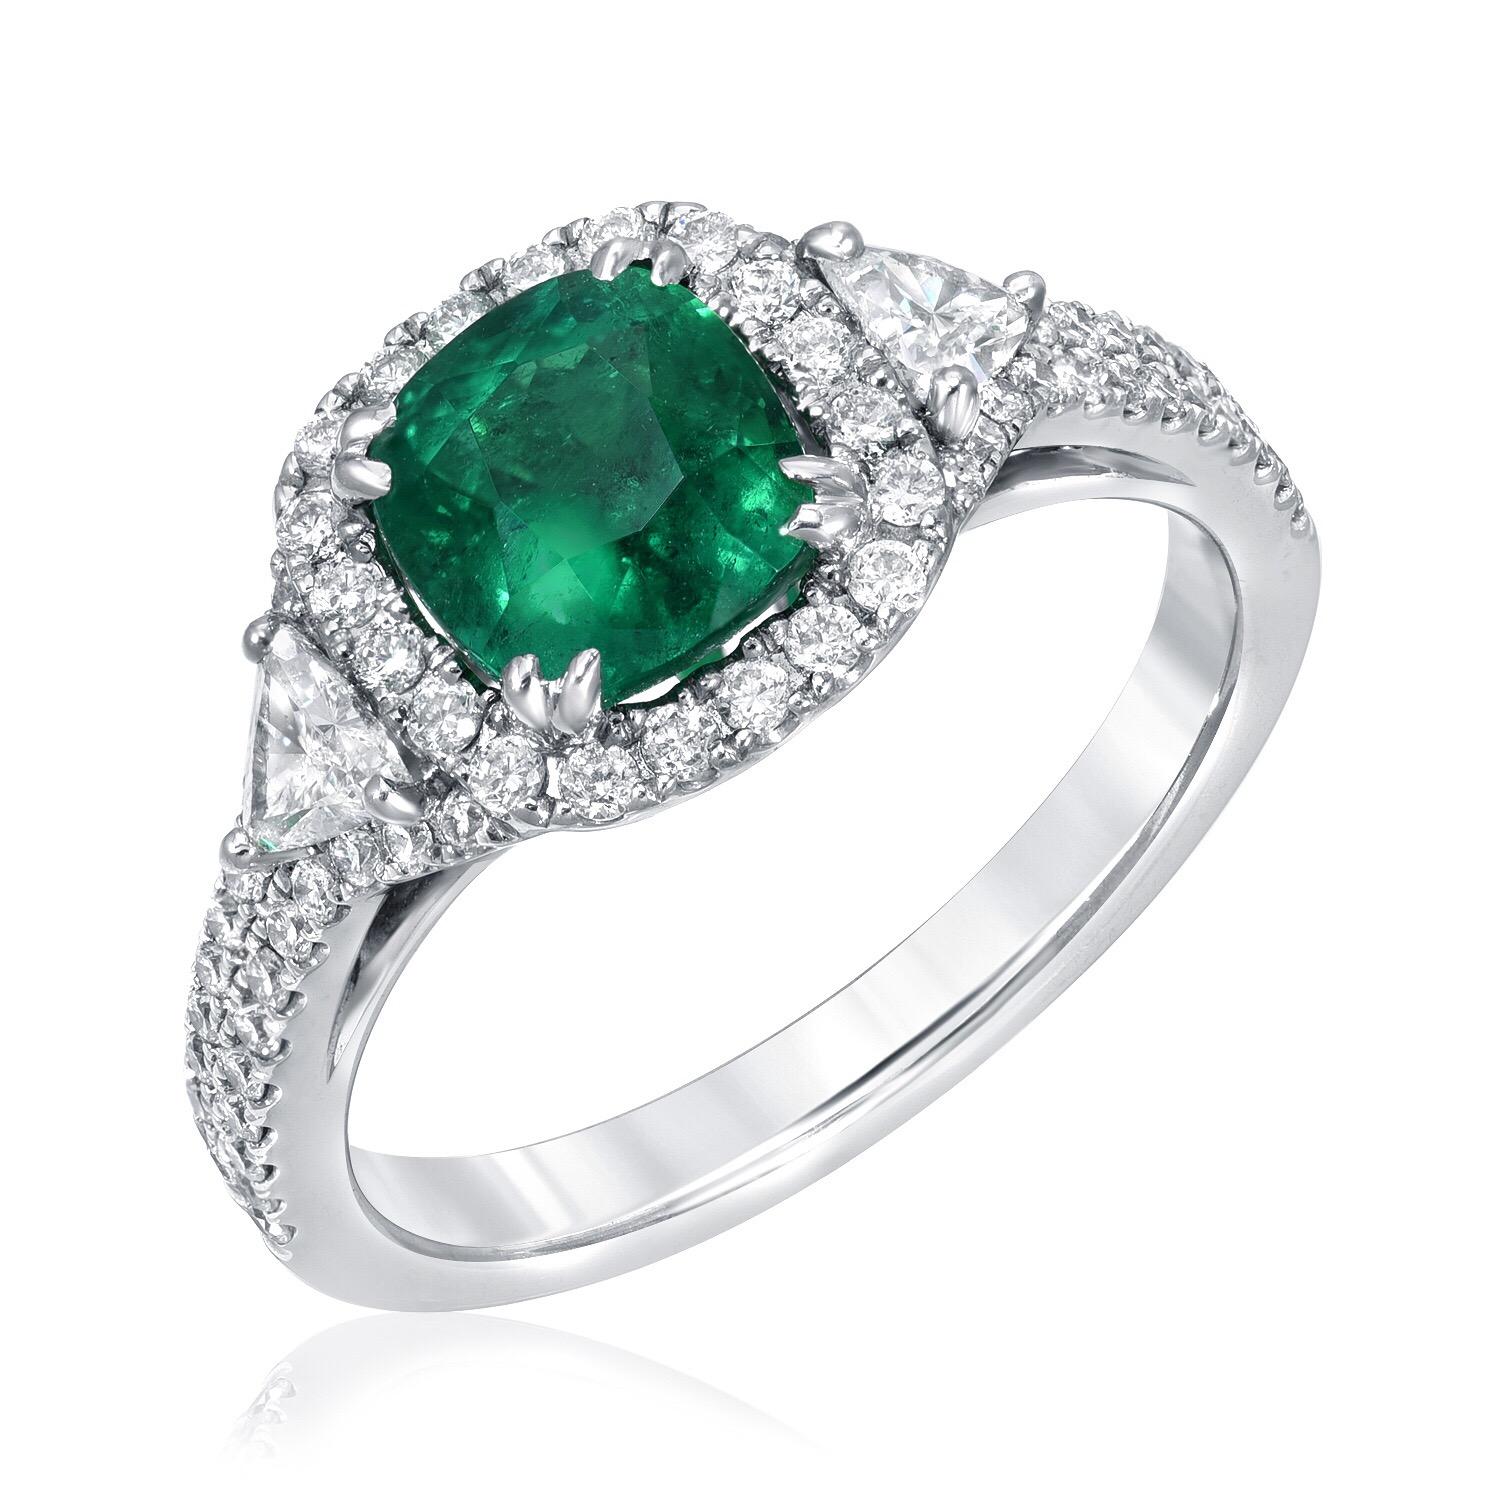 Cushion cut Colombian Emerald ring set with a 1.39 carat Emerald and a total of 0.63 carats of trillion and round brilliant diamonds. This Emerald engagement ring or cocktail ring is crafted in 18K white gold.
Emerald ring size 6.5. Resizing is